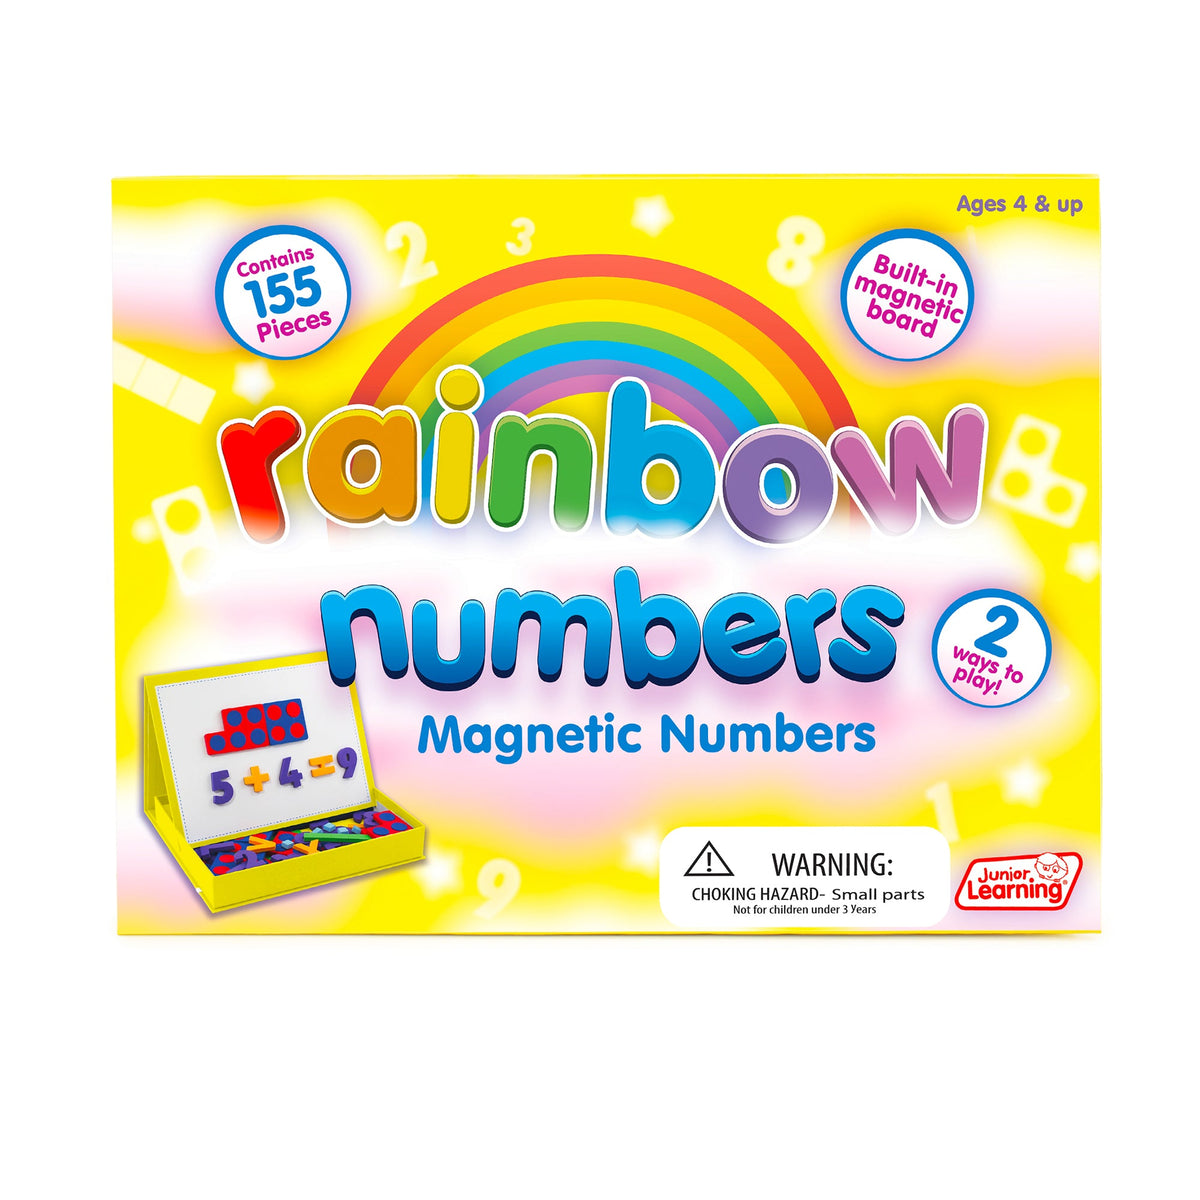 Magnetic Foam Numbers - 60 Pieces